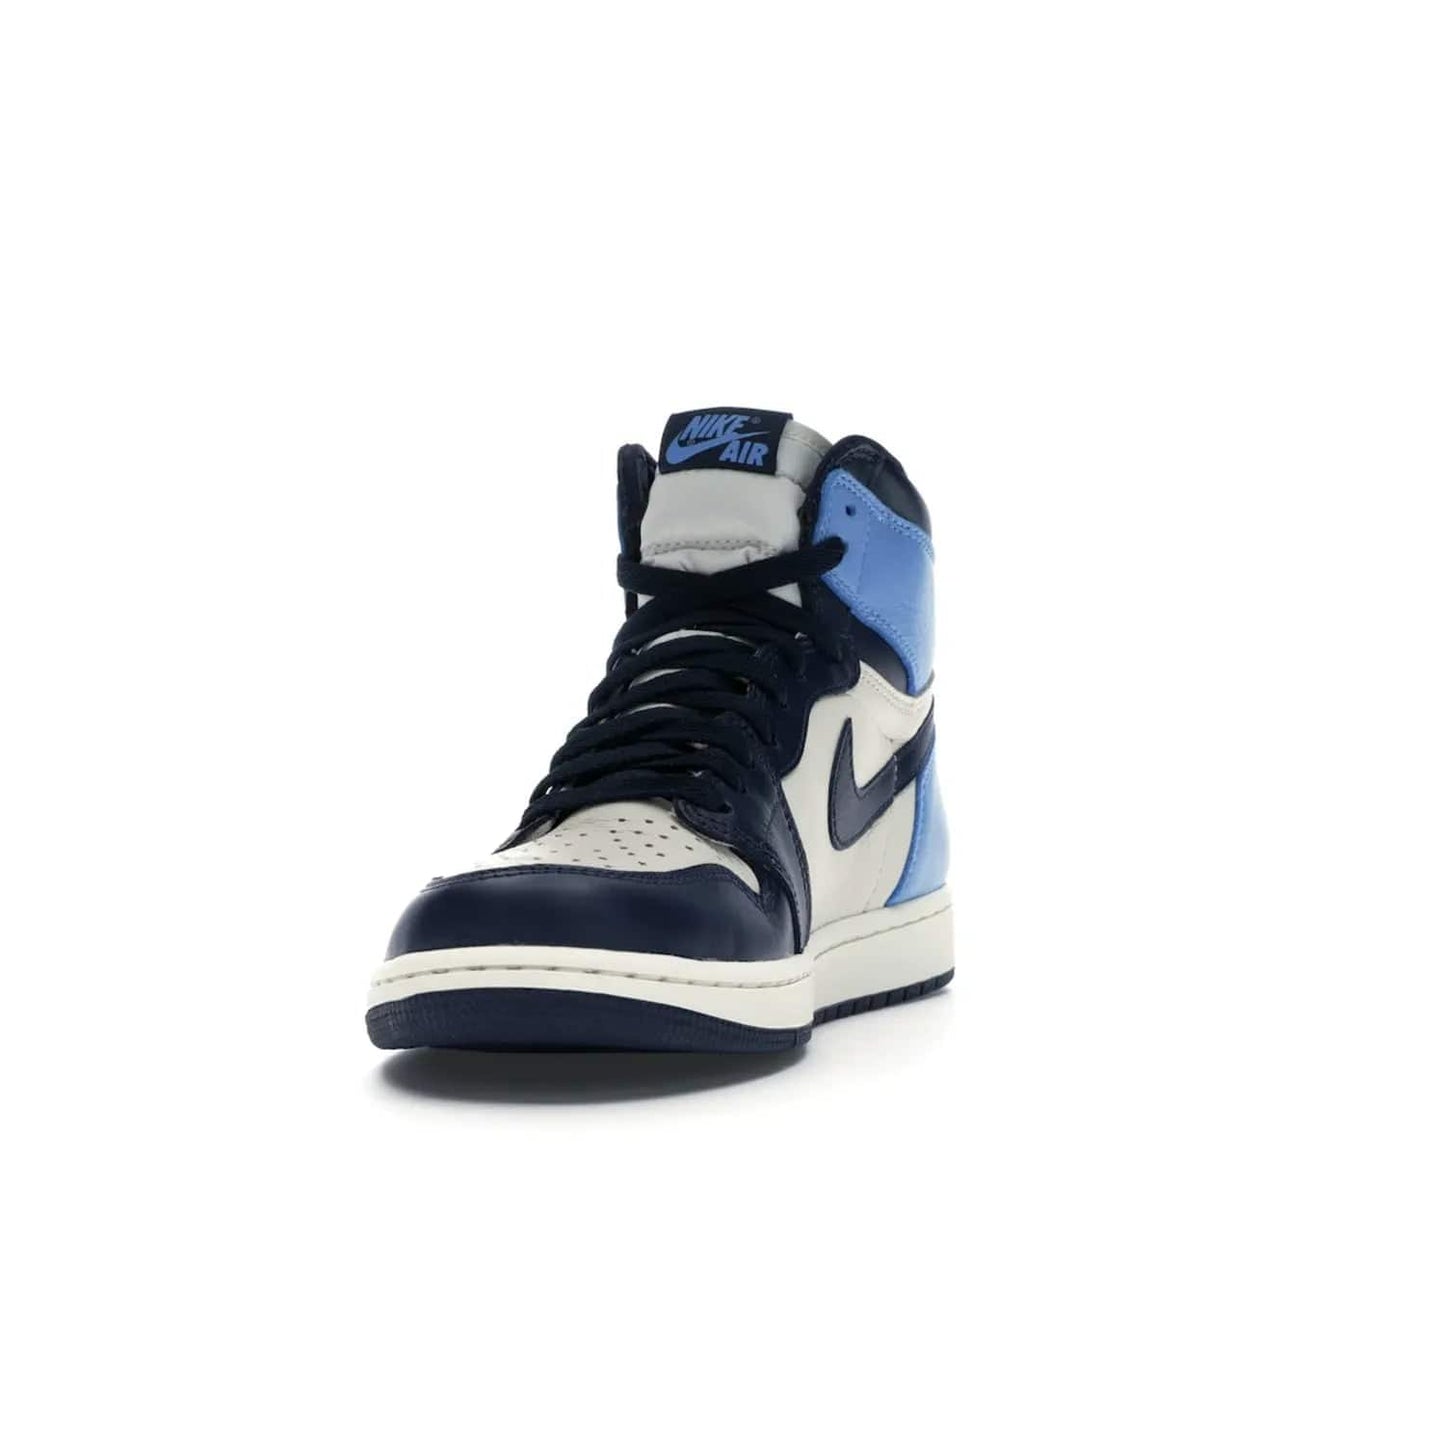 Jordan 1 Retro High Obsidian UNC - Image 12 - Only at www.BallersClubKickz.com - Bring a timeless classic to your wardrobe with the Air Jordan 1 Retro High "Obsidian/University Blue”. A full leather upper combines Obsidian and University Blue detailing for a retro Jordan style. Stitched Jumpman logo pays tribute to UNC. Experience classic style with a timeless sneaker.